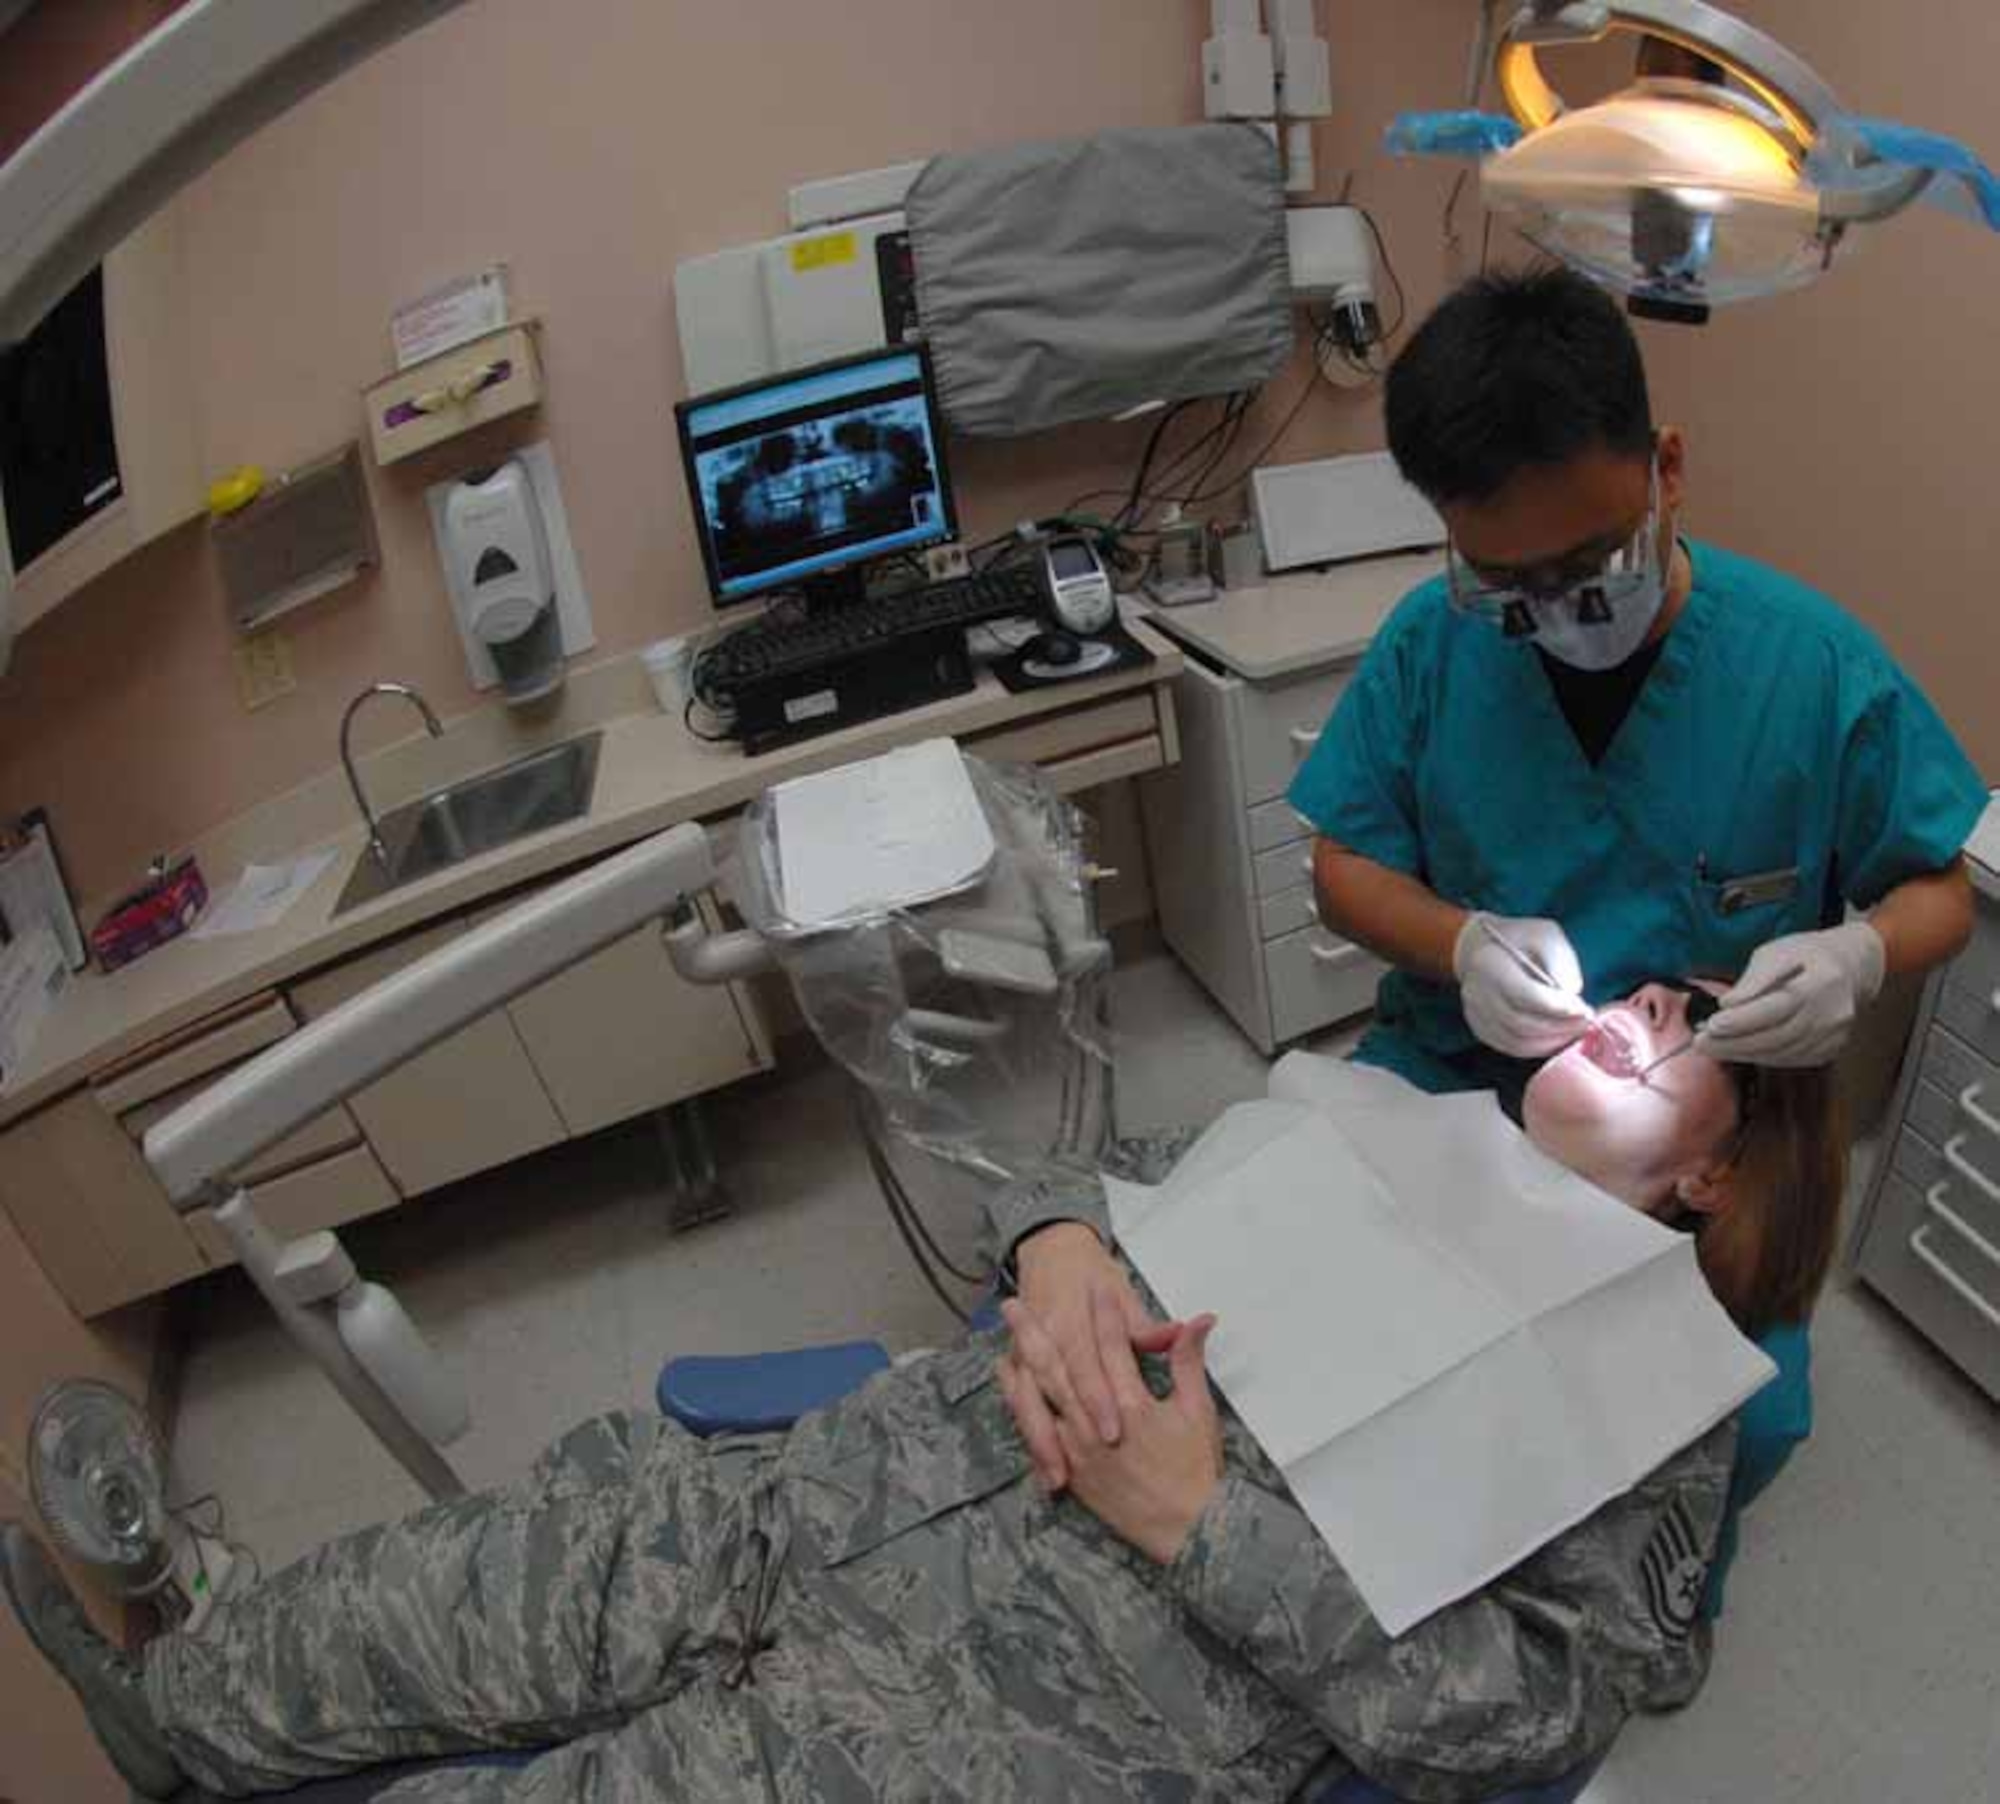 Maj. Lance Kim, a general dentist assigned to the 926th Aerospace Medicine Flight, conducts a routine dental exam on Technical Sgt. Susan O'Neal, 926th Mission Support Squadron logistics planner Aug. 22, 2008 at Nellis Air Force Base, Nev. The 926th Group is an Air Force Reserve unit under the 10th Air Force, Naval Air Station Joint Reserve Base, Fort Worth, Texas. The group is located at Nellis AFB as an associate unit to the United States Air Force Warfare Center. Through Total Force Integration, reservists are integrated into regular Air Force units, accomplishing the USAFWC's mission alongside REGAF personnel on a daily basis.
(U.S. Air Force Photo/Senior Airman Larry E. Reid Jr.)